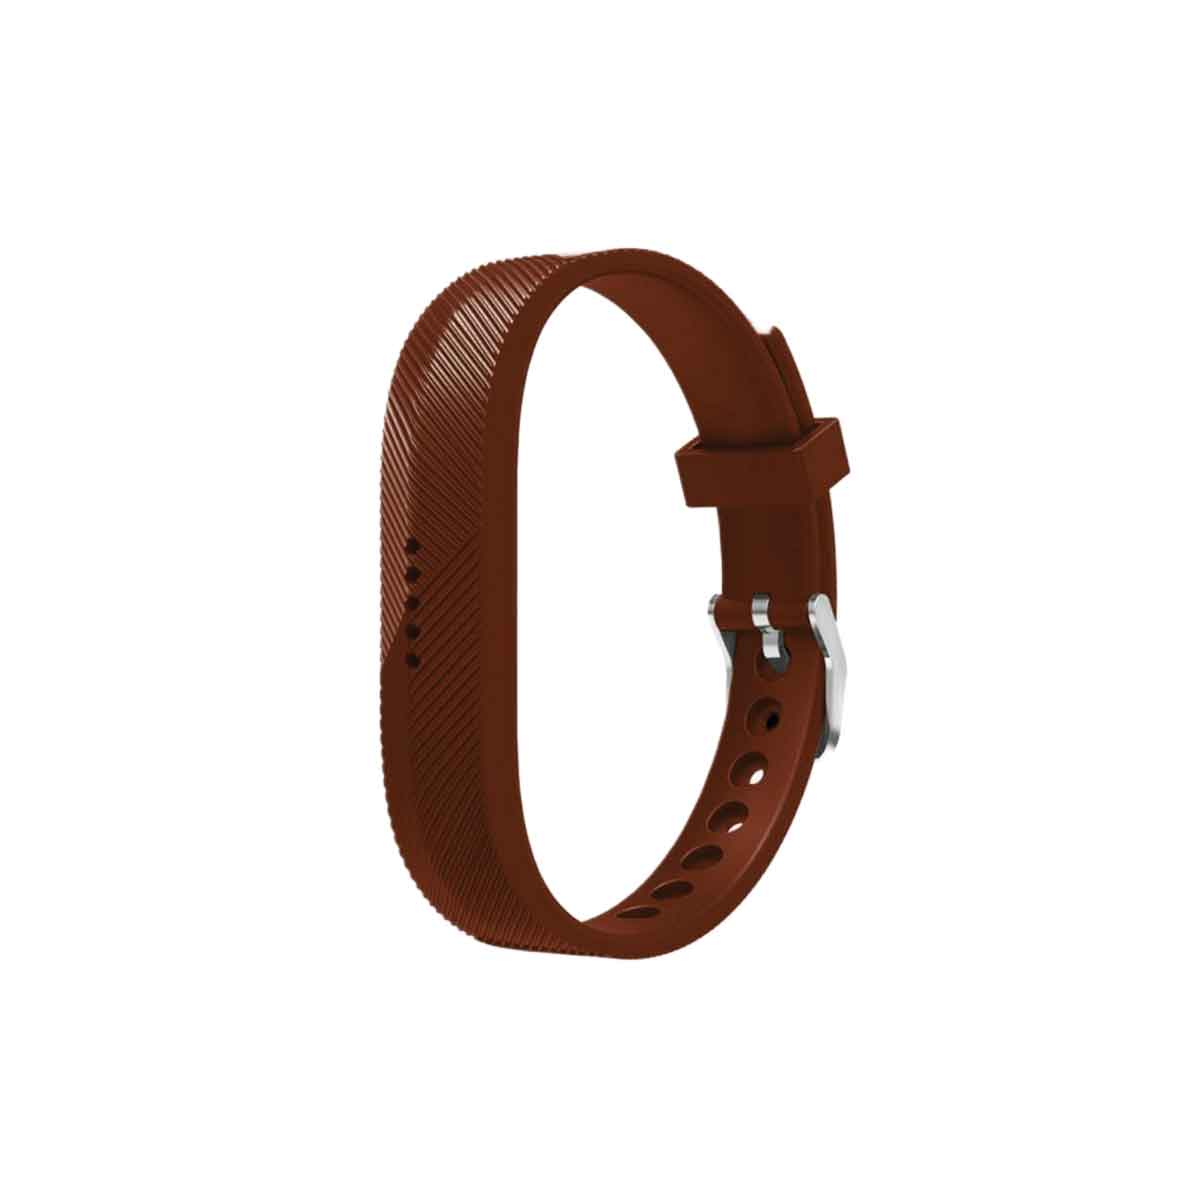 Secure Fitbit Flex 2 Band Replacement Strap with Buckle Coffee  